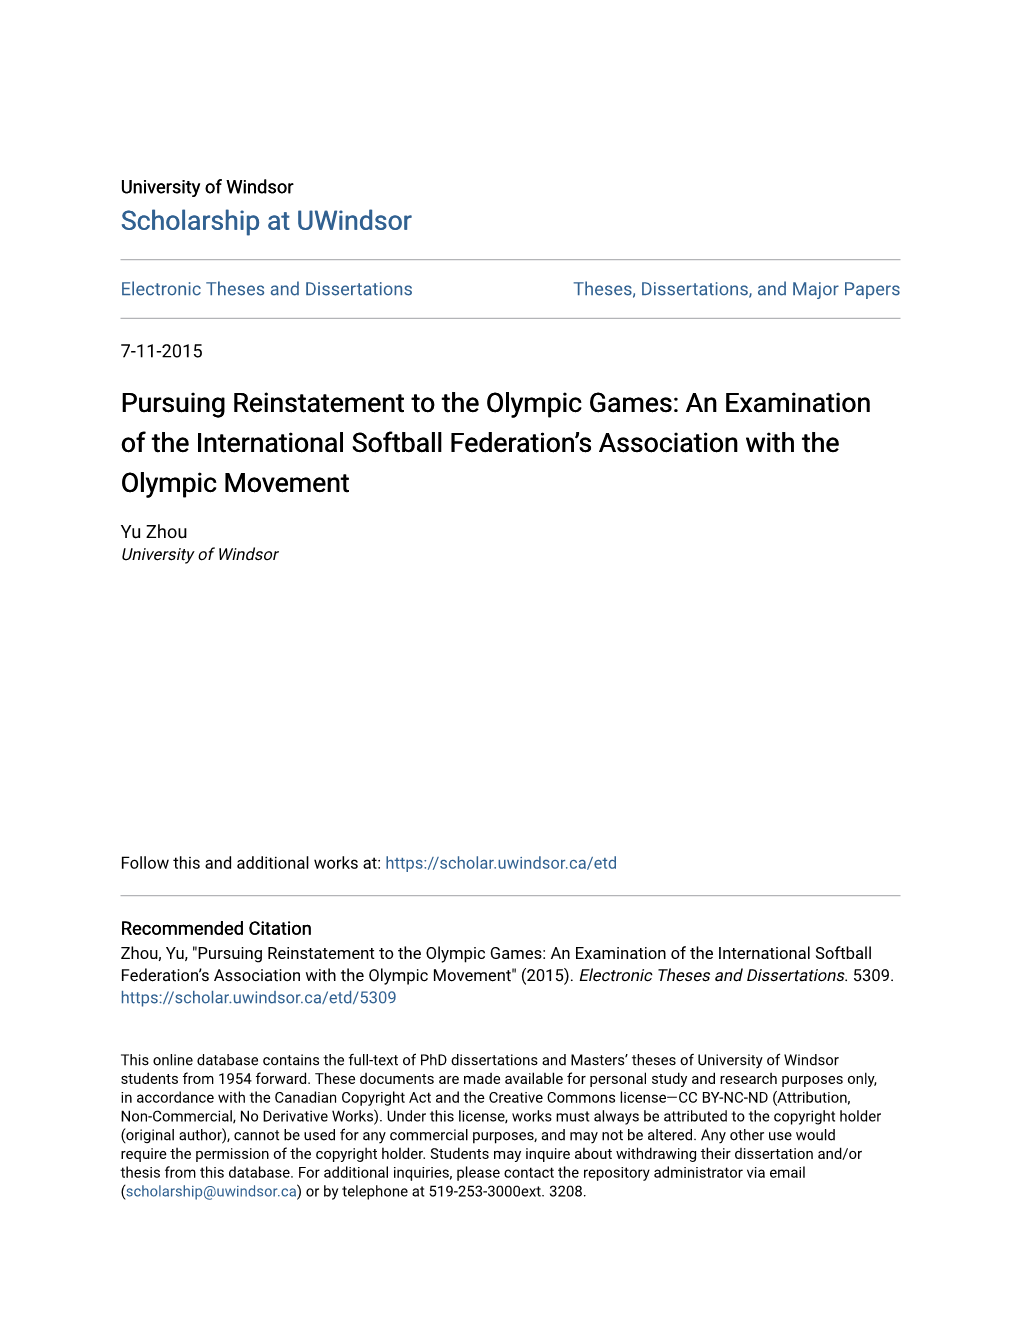 Pursuing Reinstatement to the Olympic Games: an Examination of the International Softball Federation’S Association with the Olympic Movement